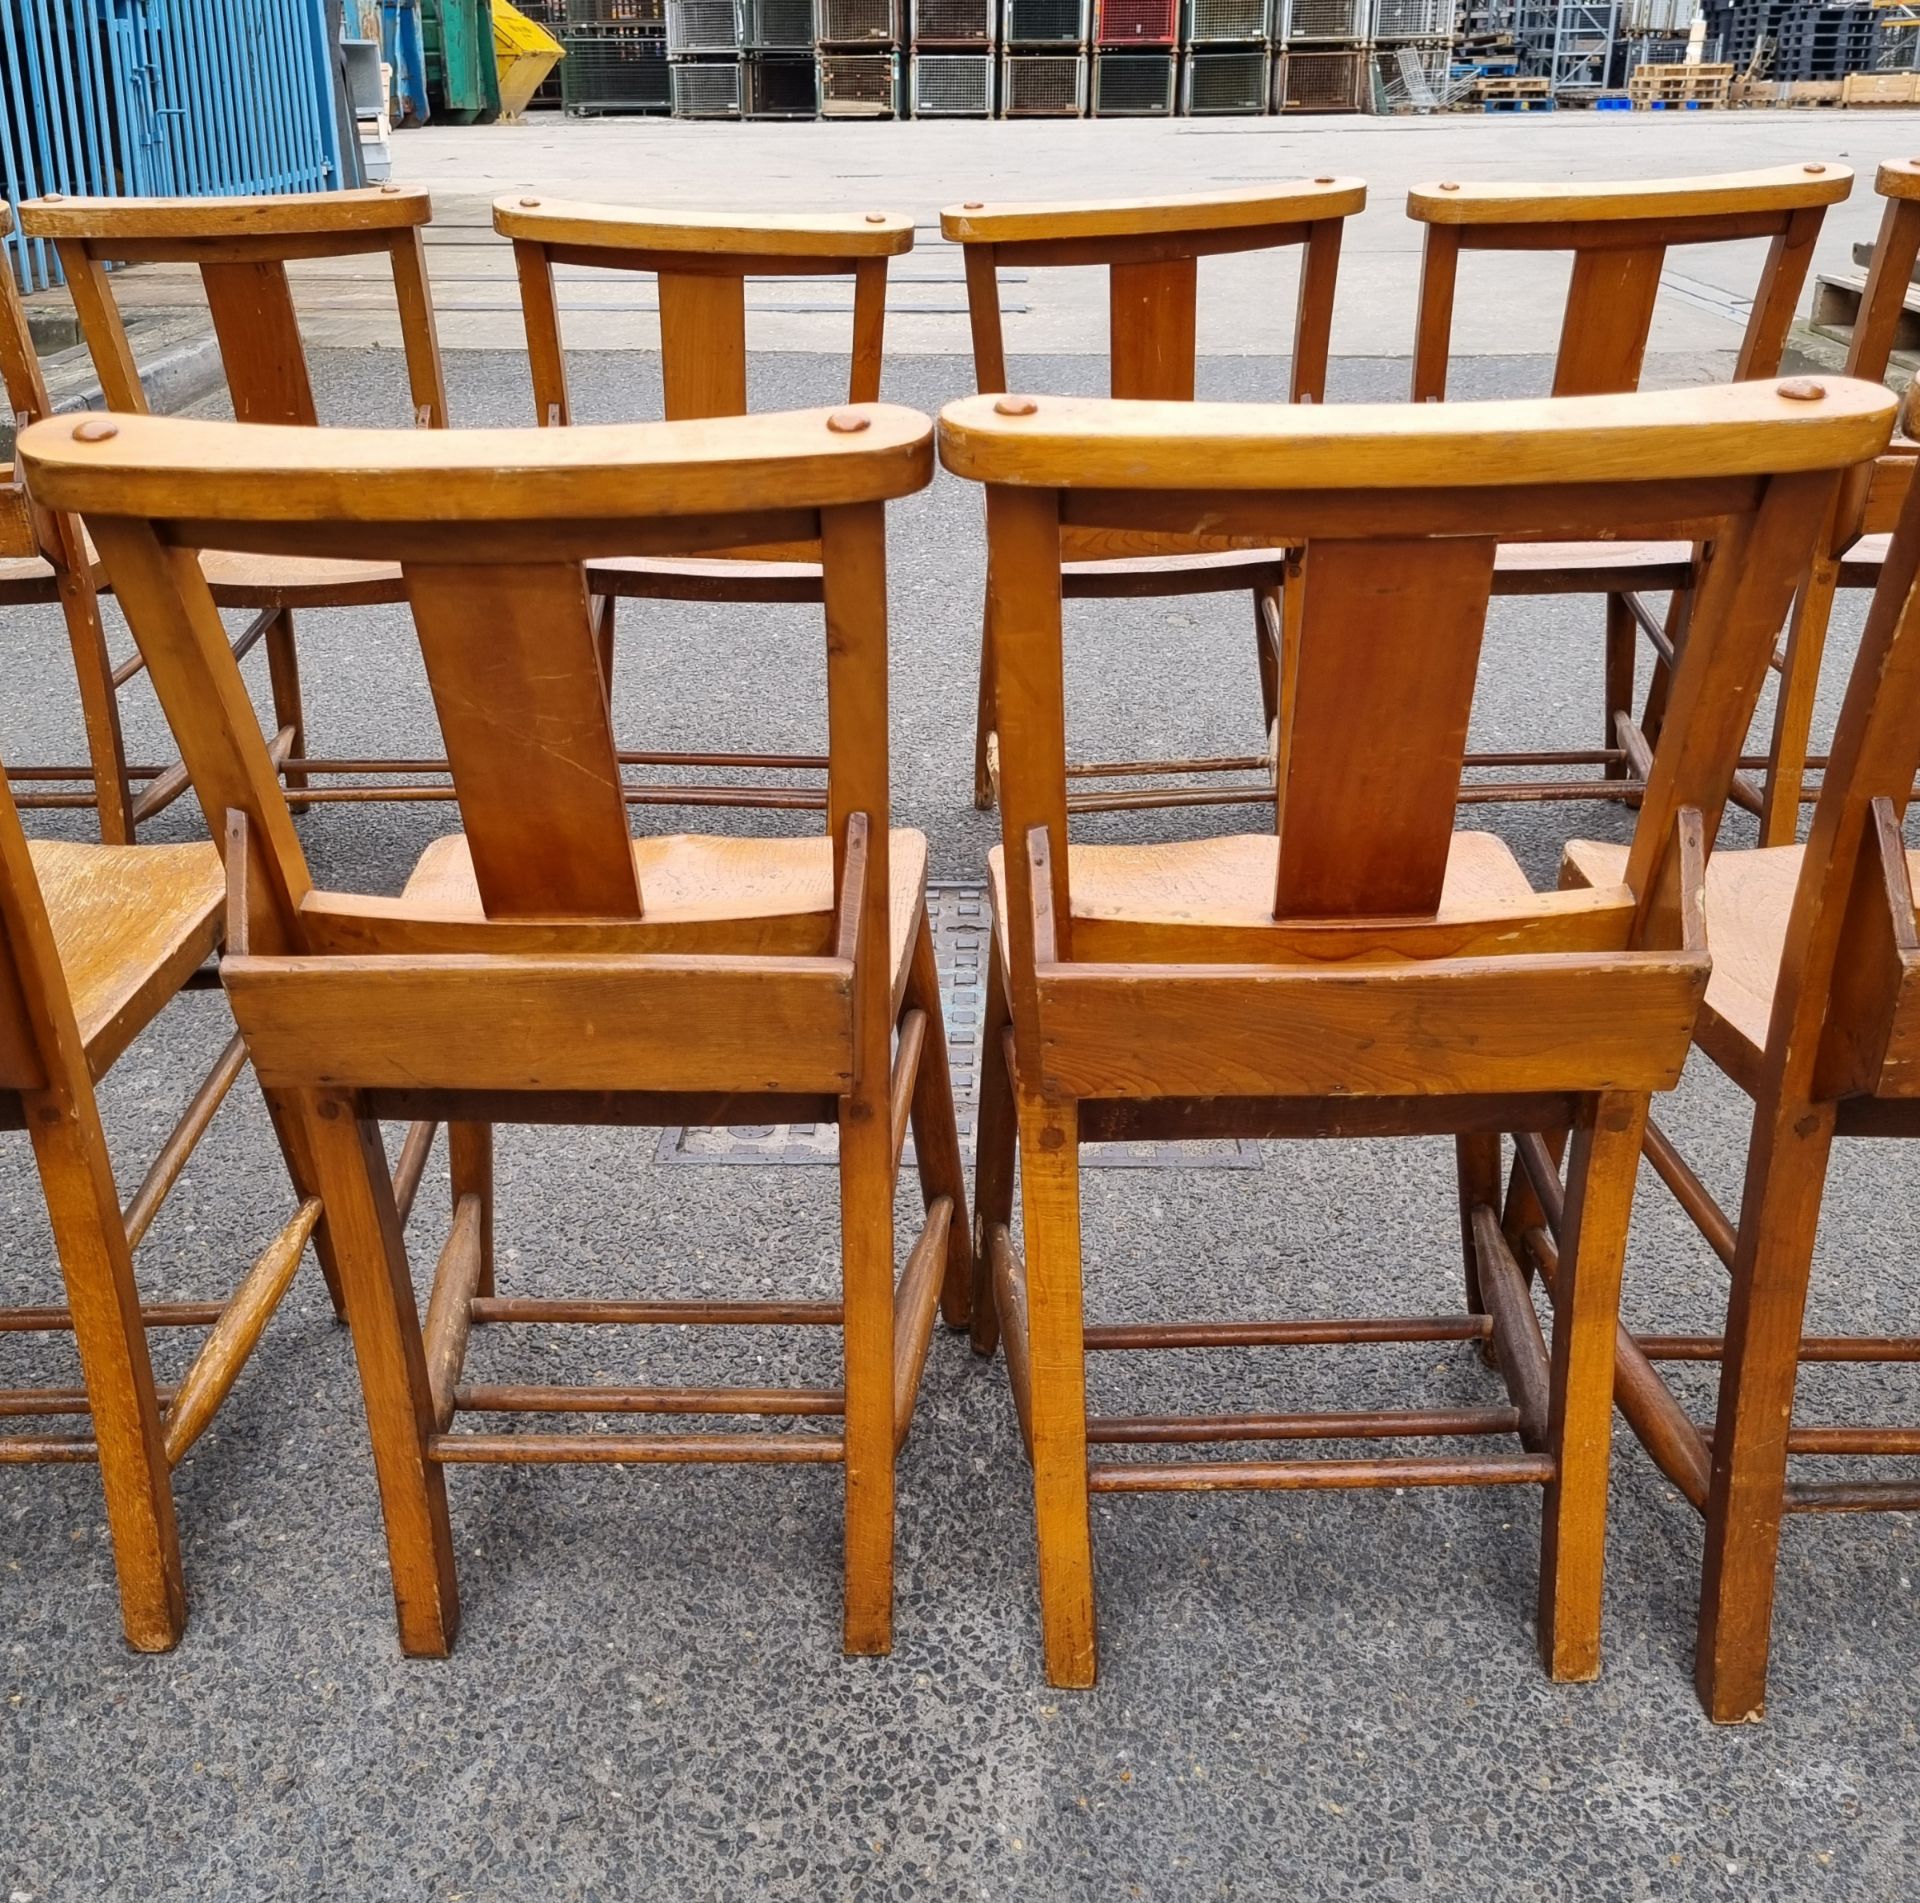 12x Wooden chairs with rear book holder - L 420 x W 420 x H 820mm - Image 5 of 10